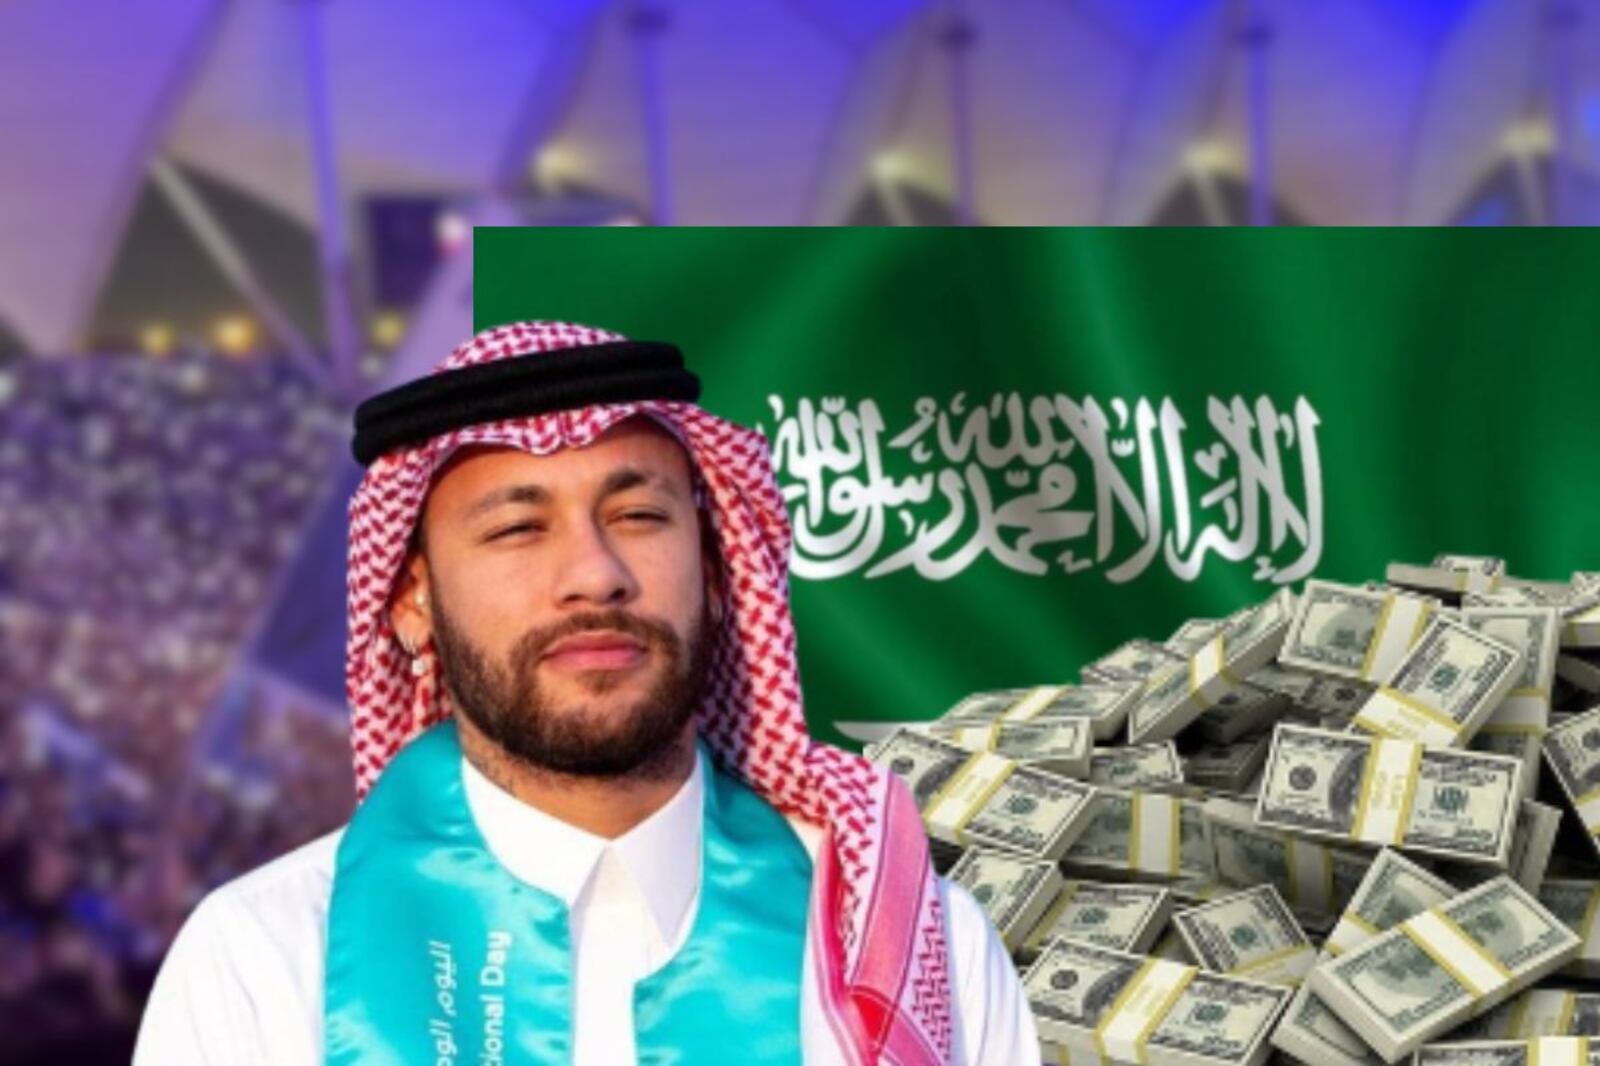 Neymar hasn’t played for months, and his new millionaire business in Arabia